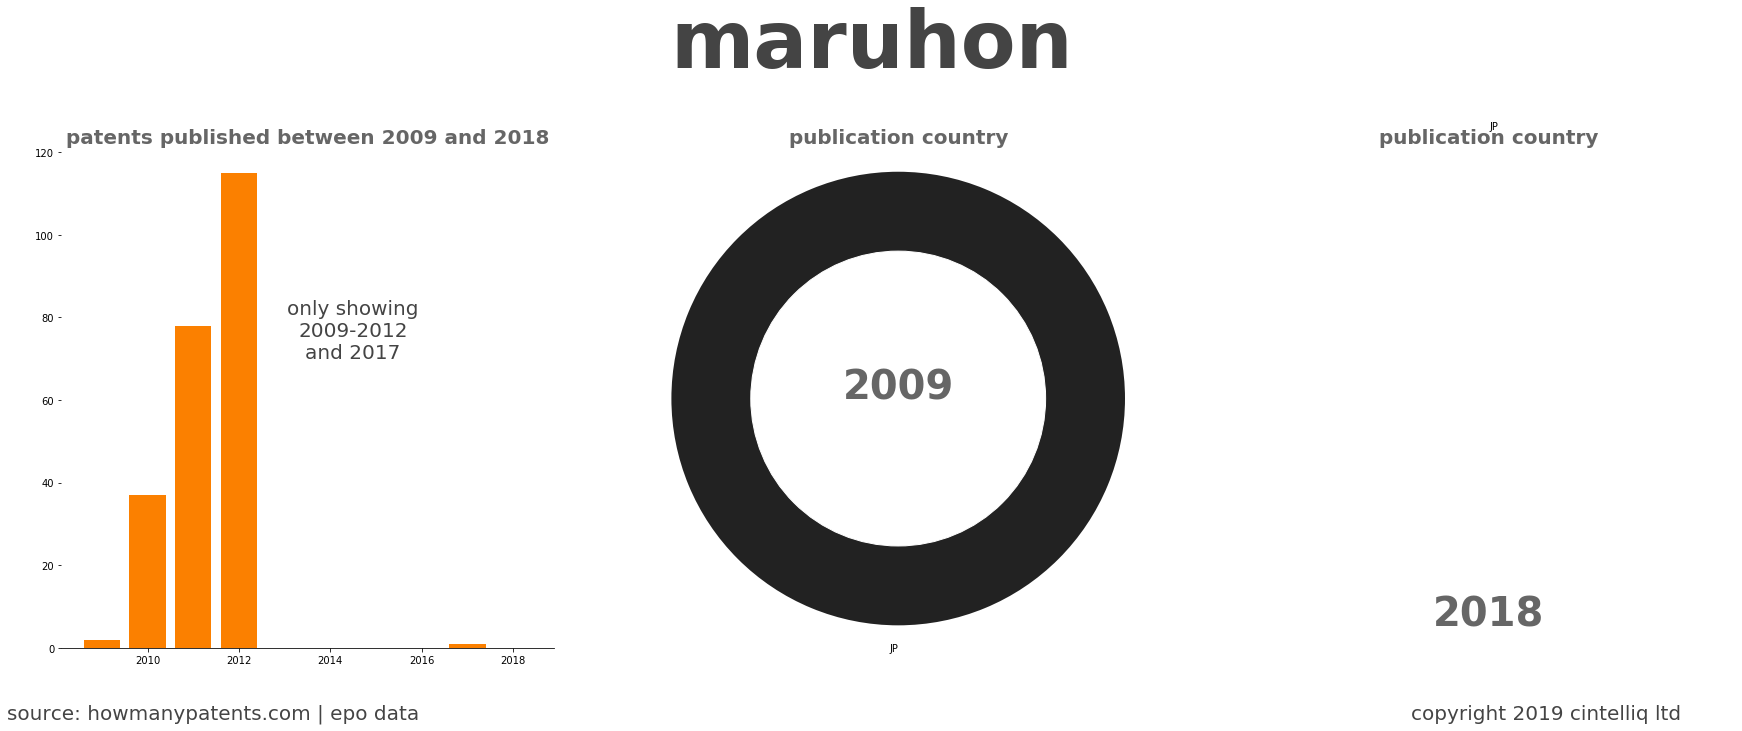 summary of patents for Maruhon